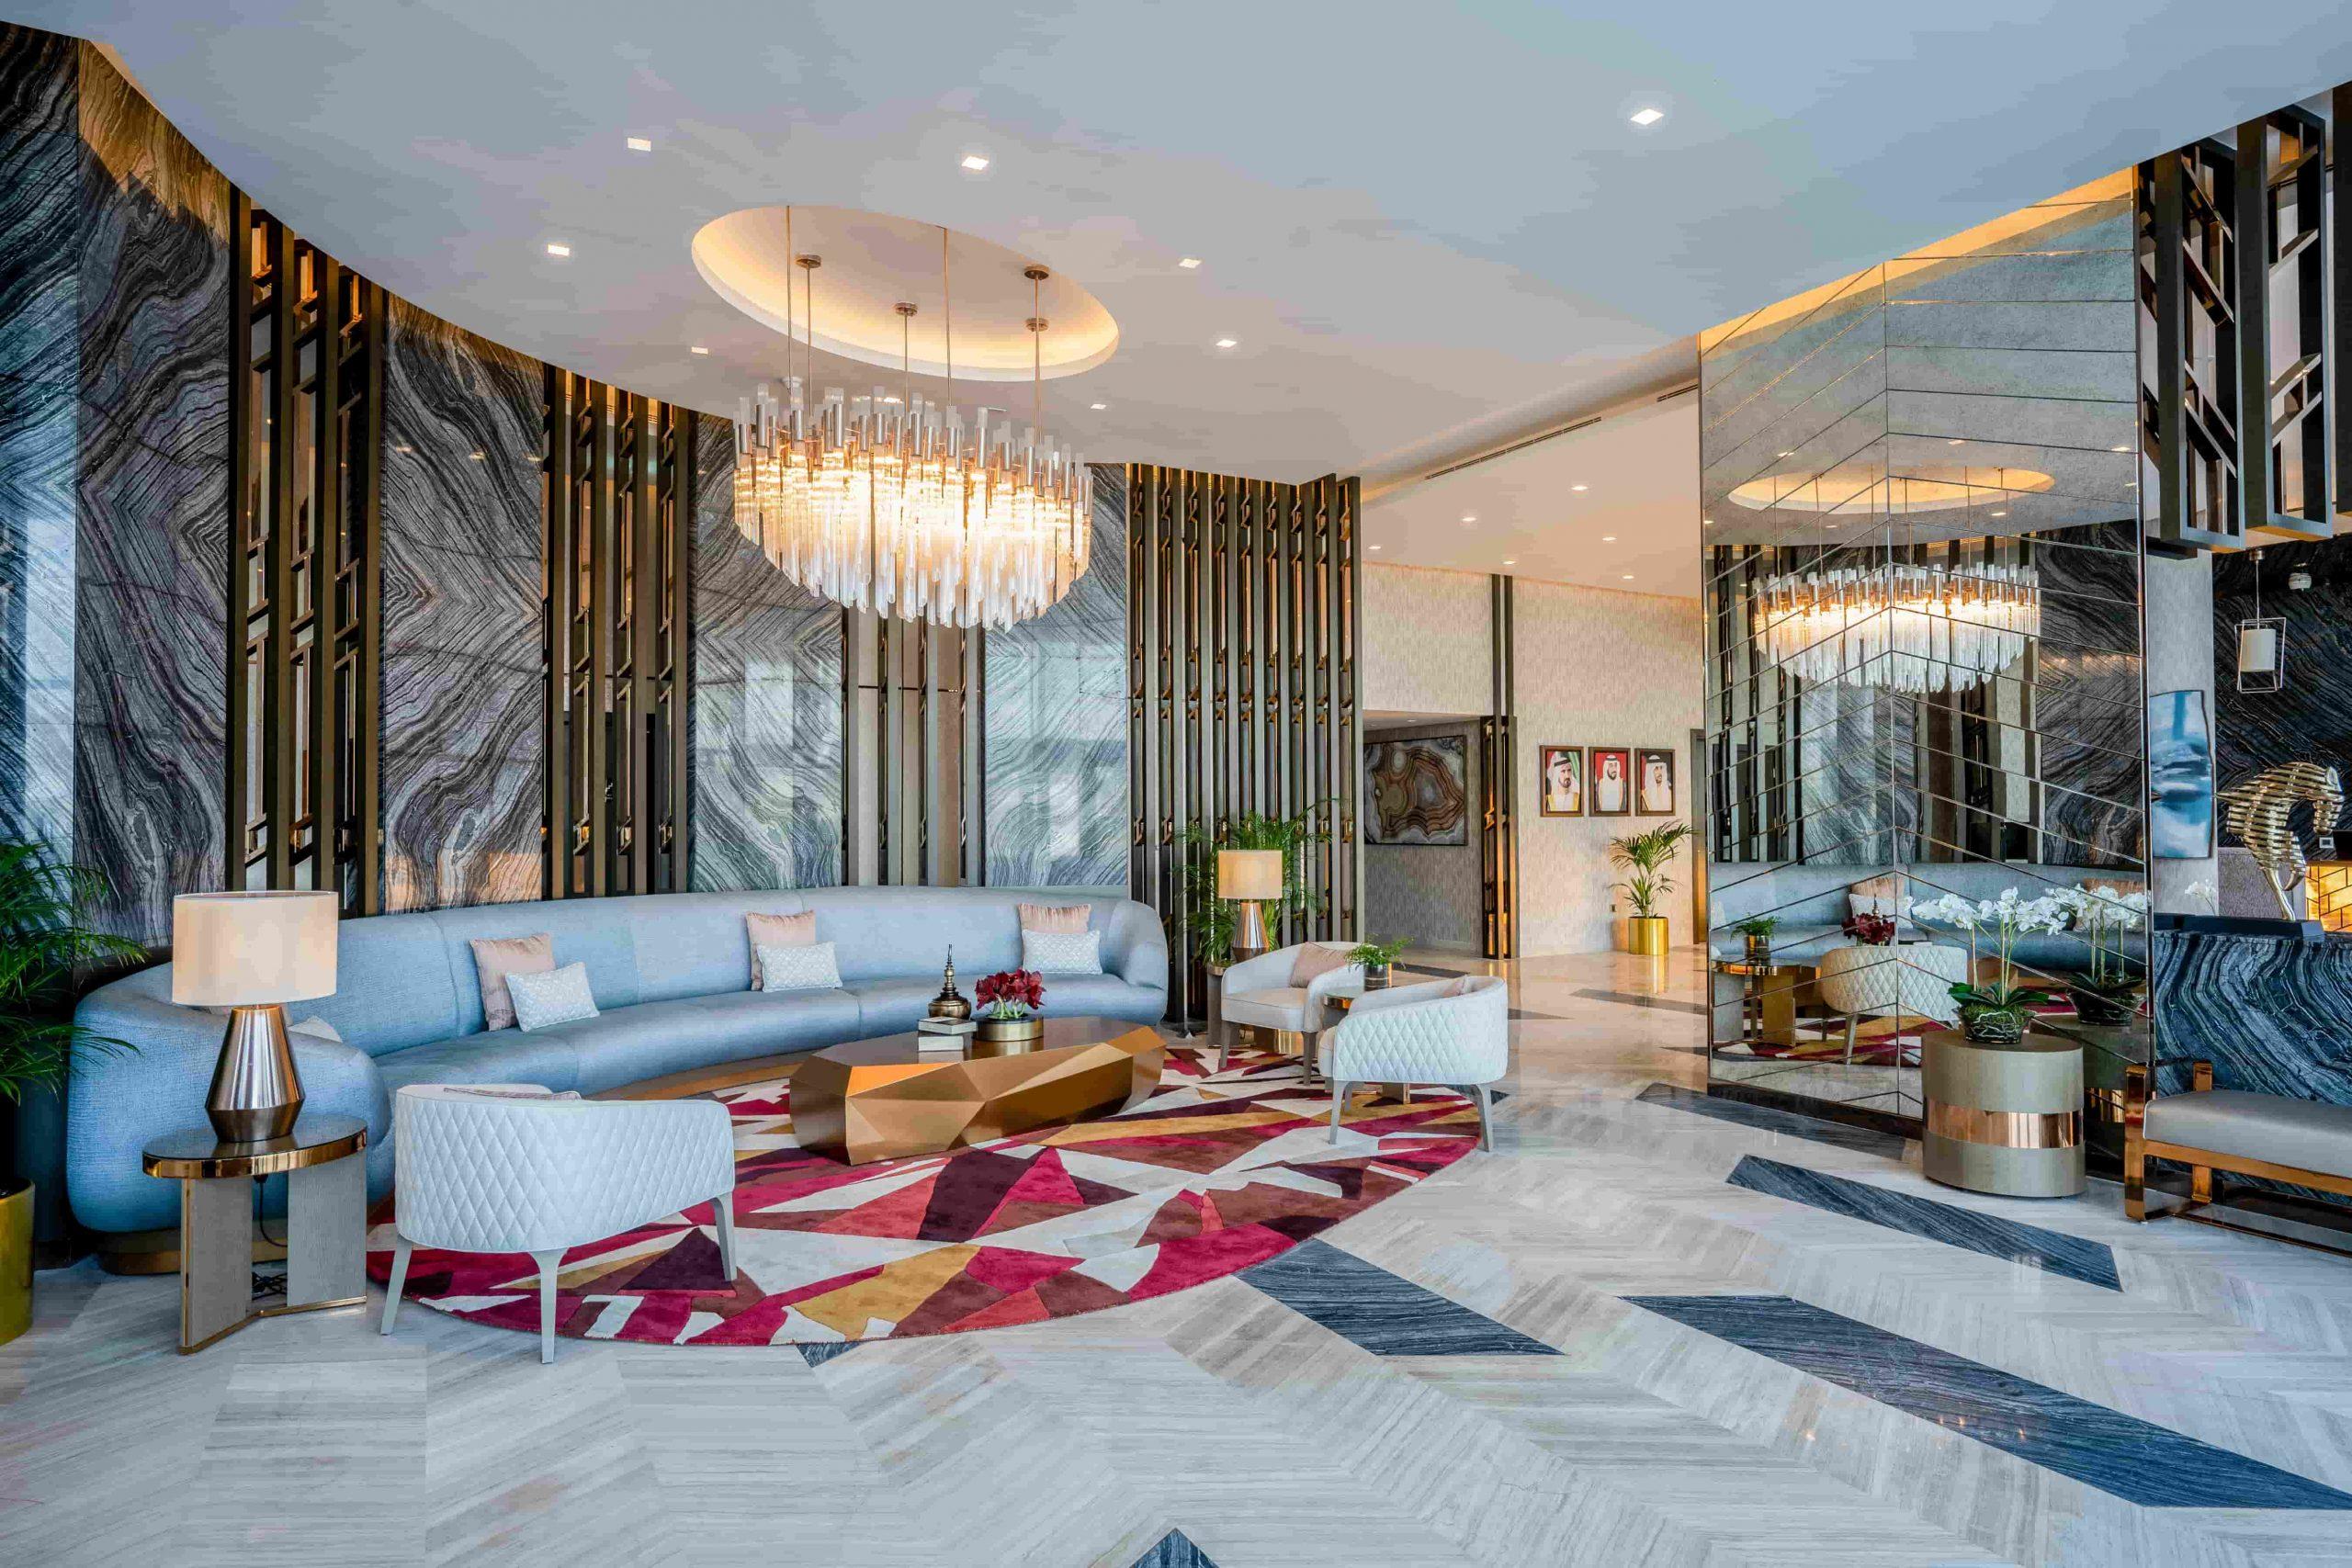 A new Radisson Hotel has opened in DAMAC Hills